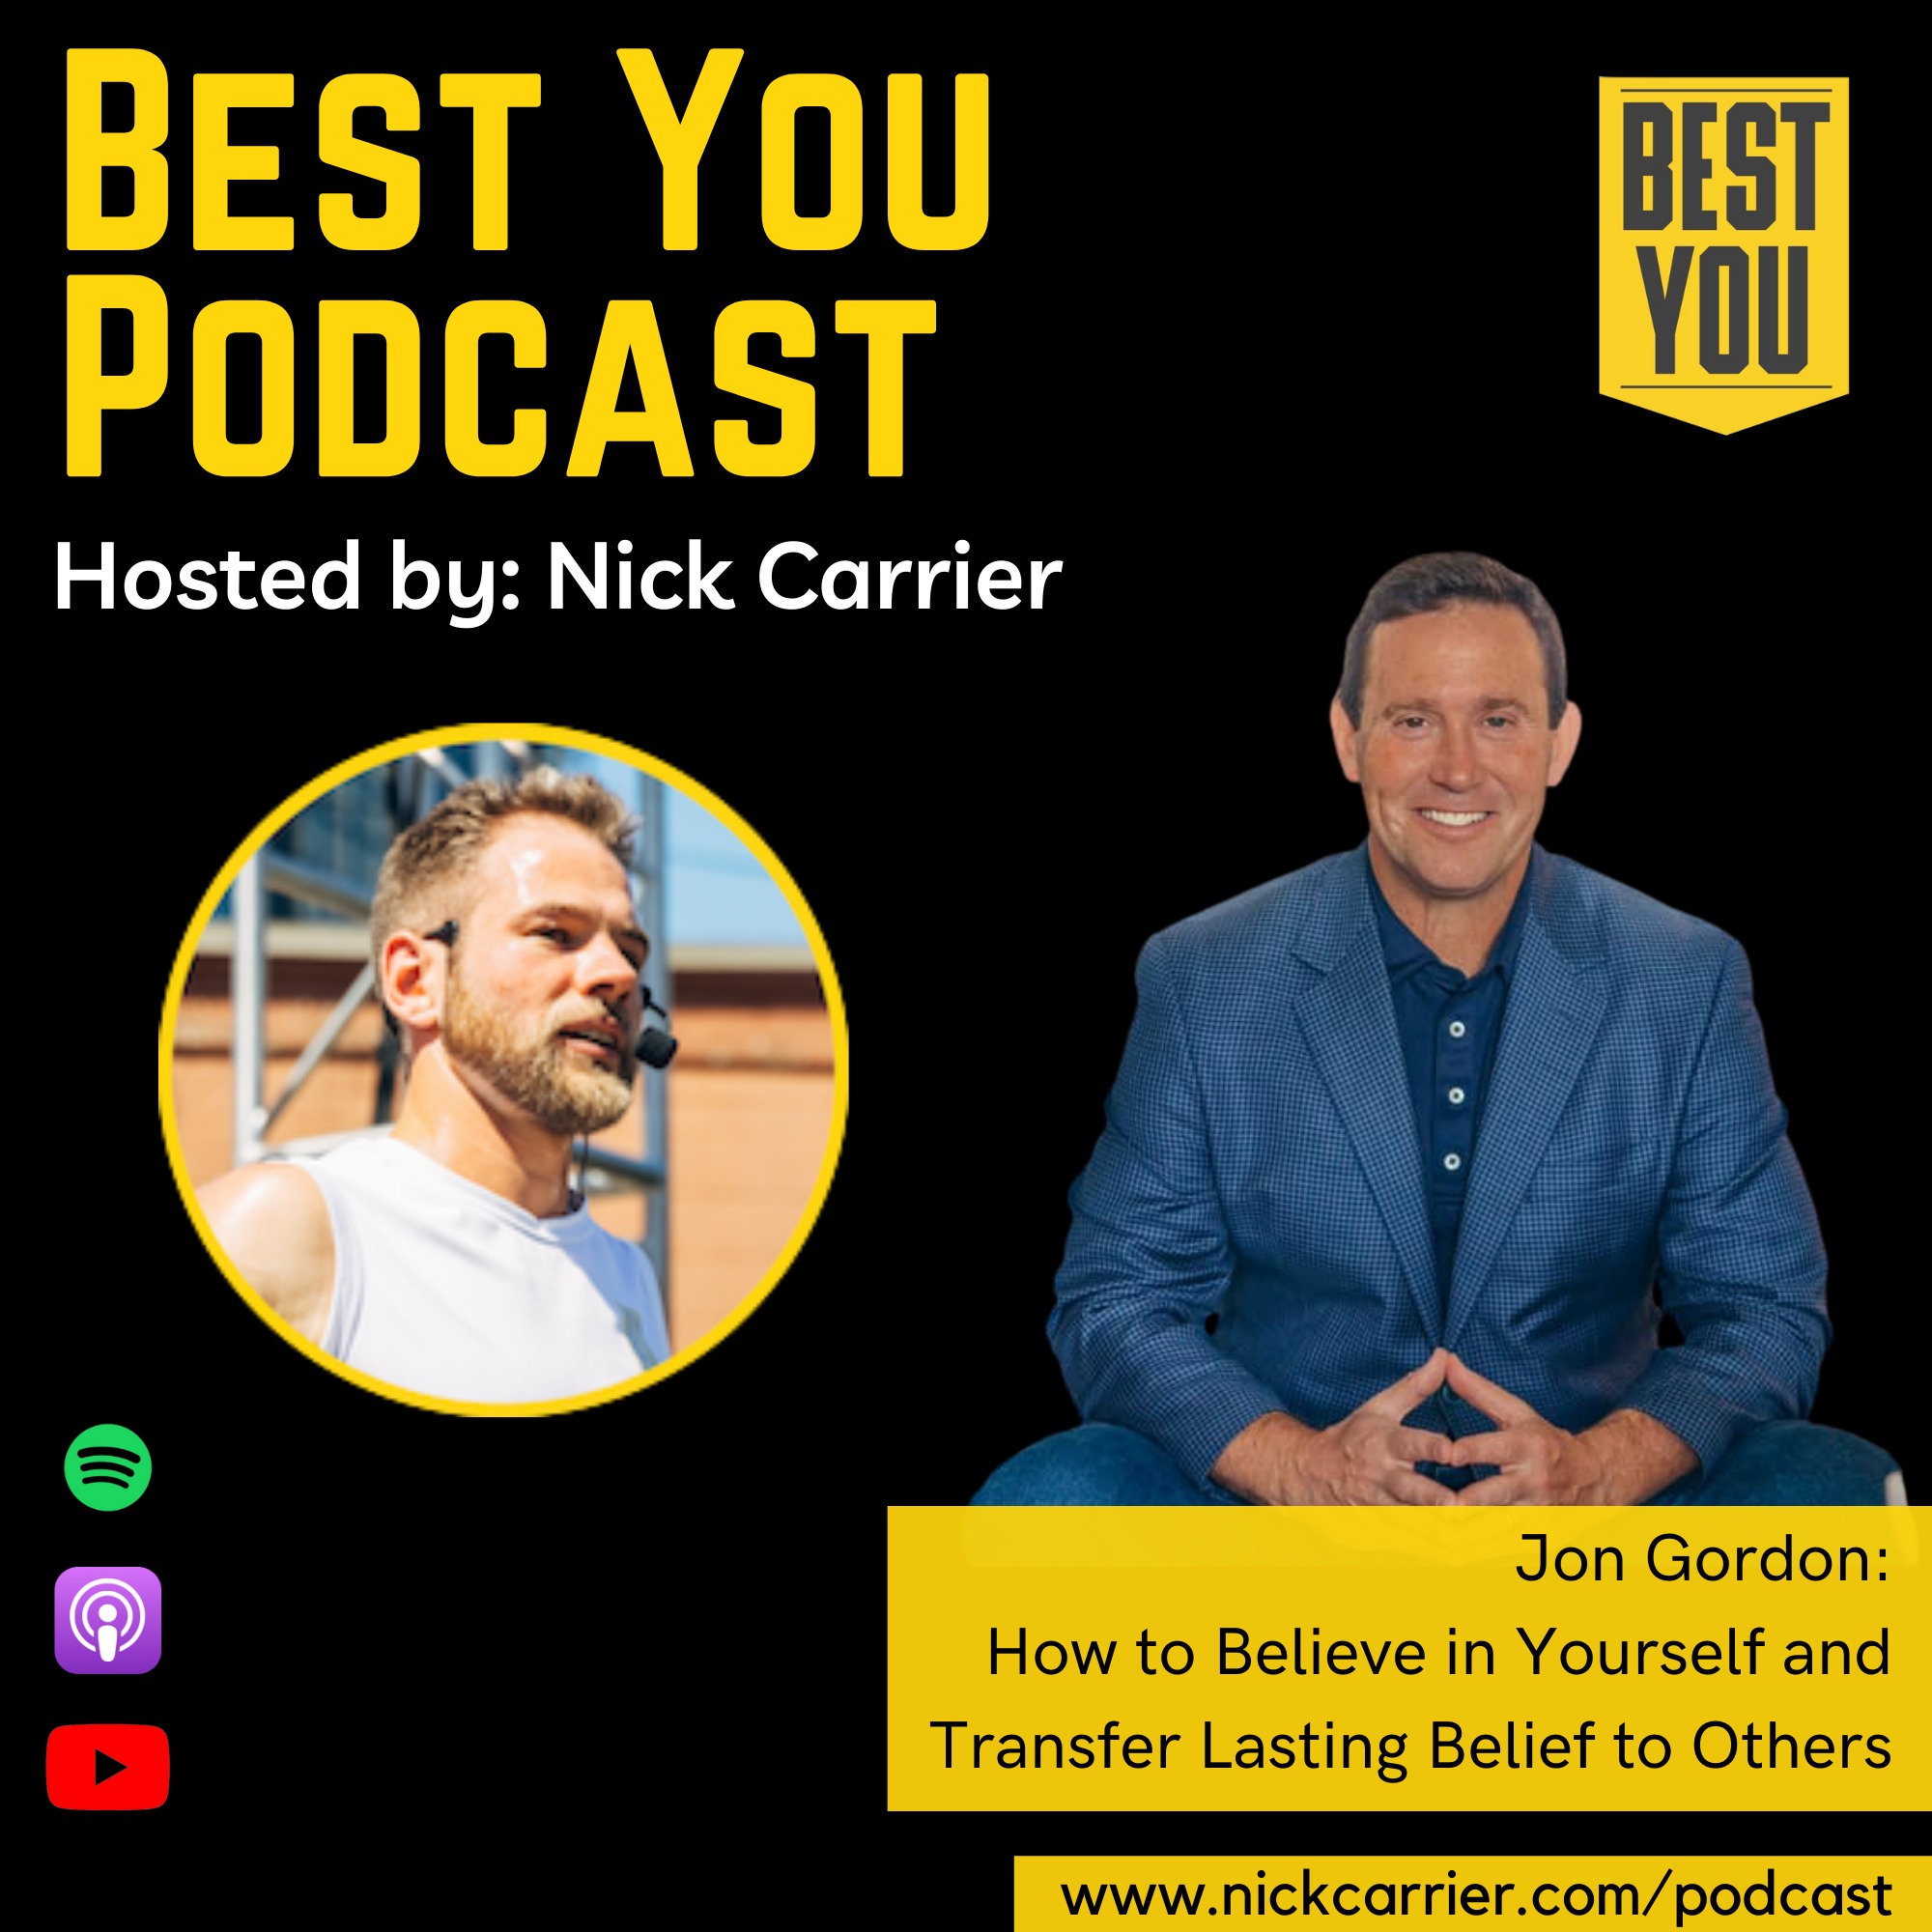 Jon Gordon - How to Believe in Yourself and Transfer Lasting Belief to Others